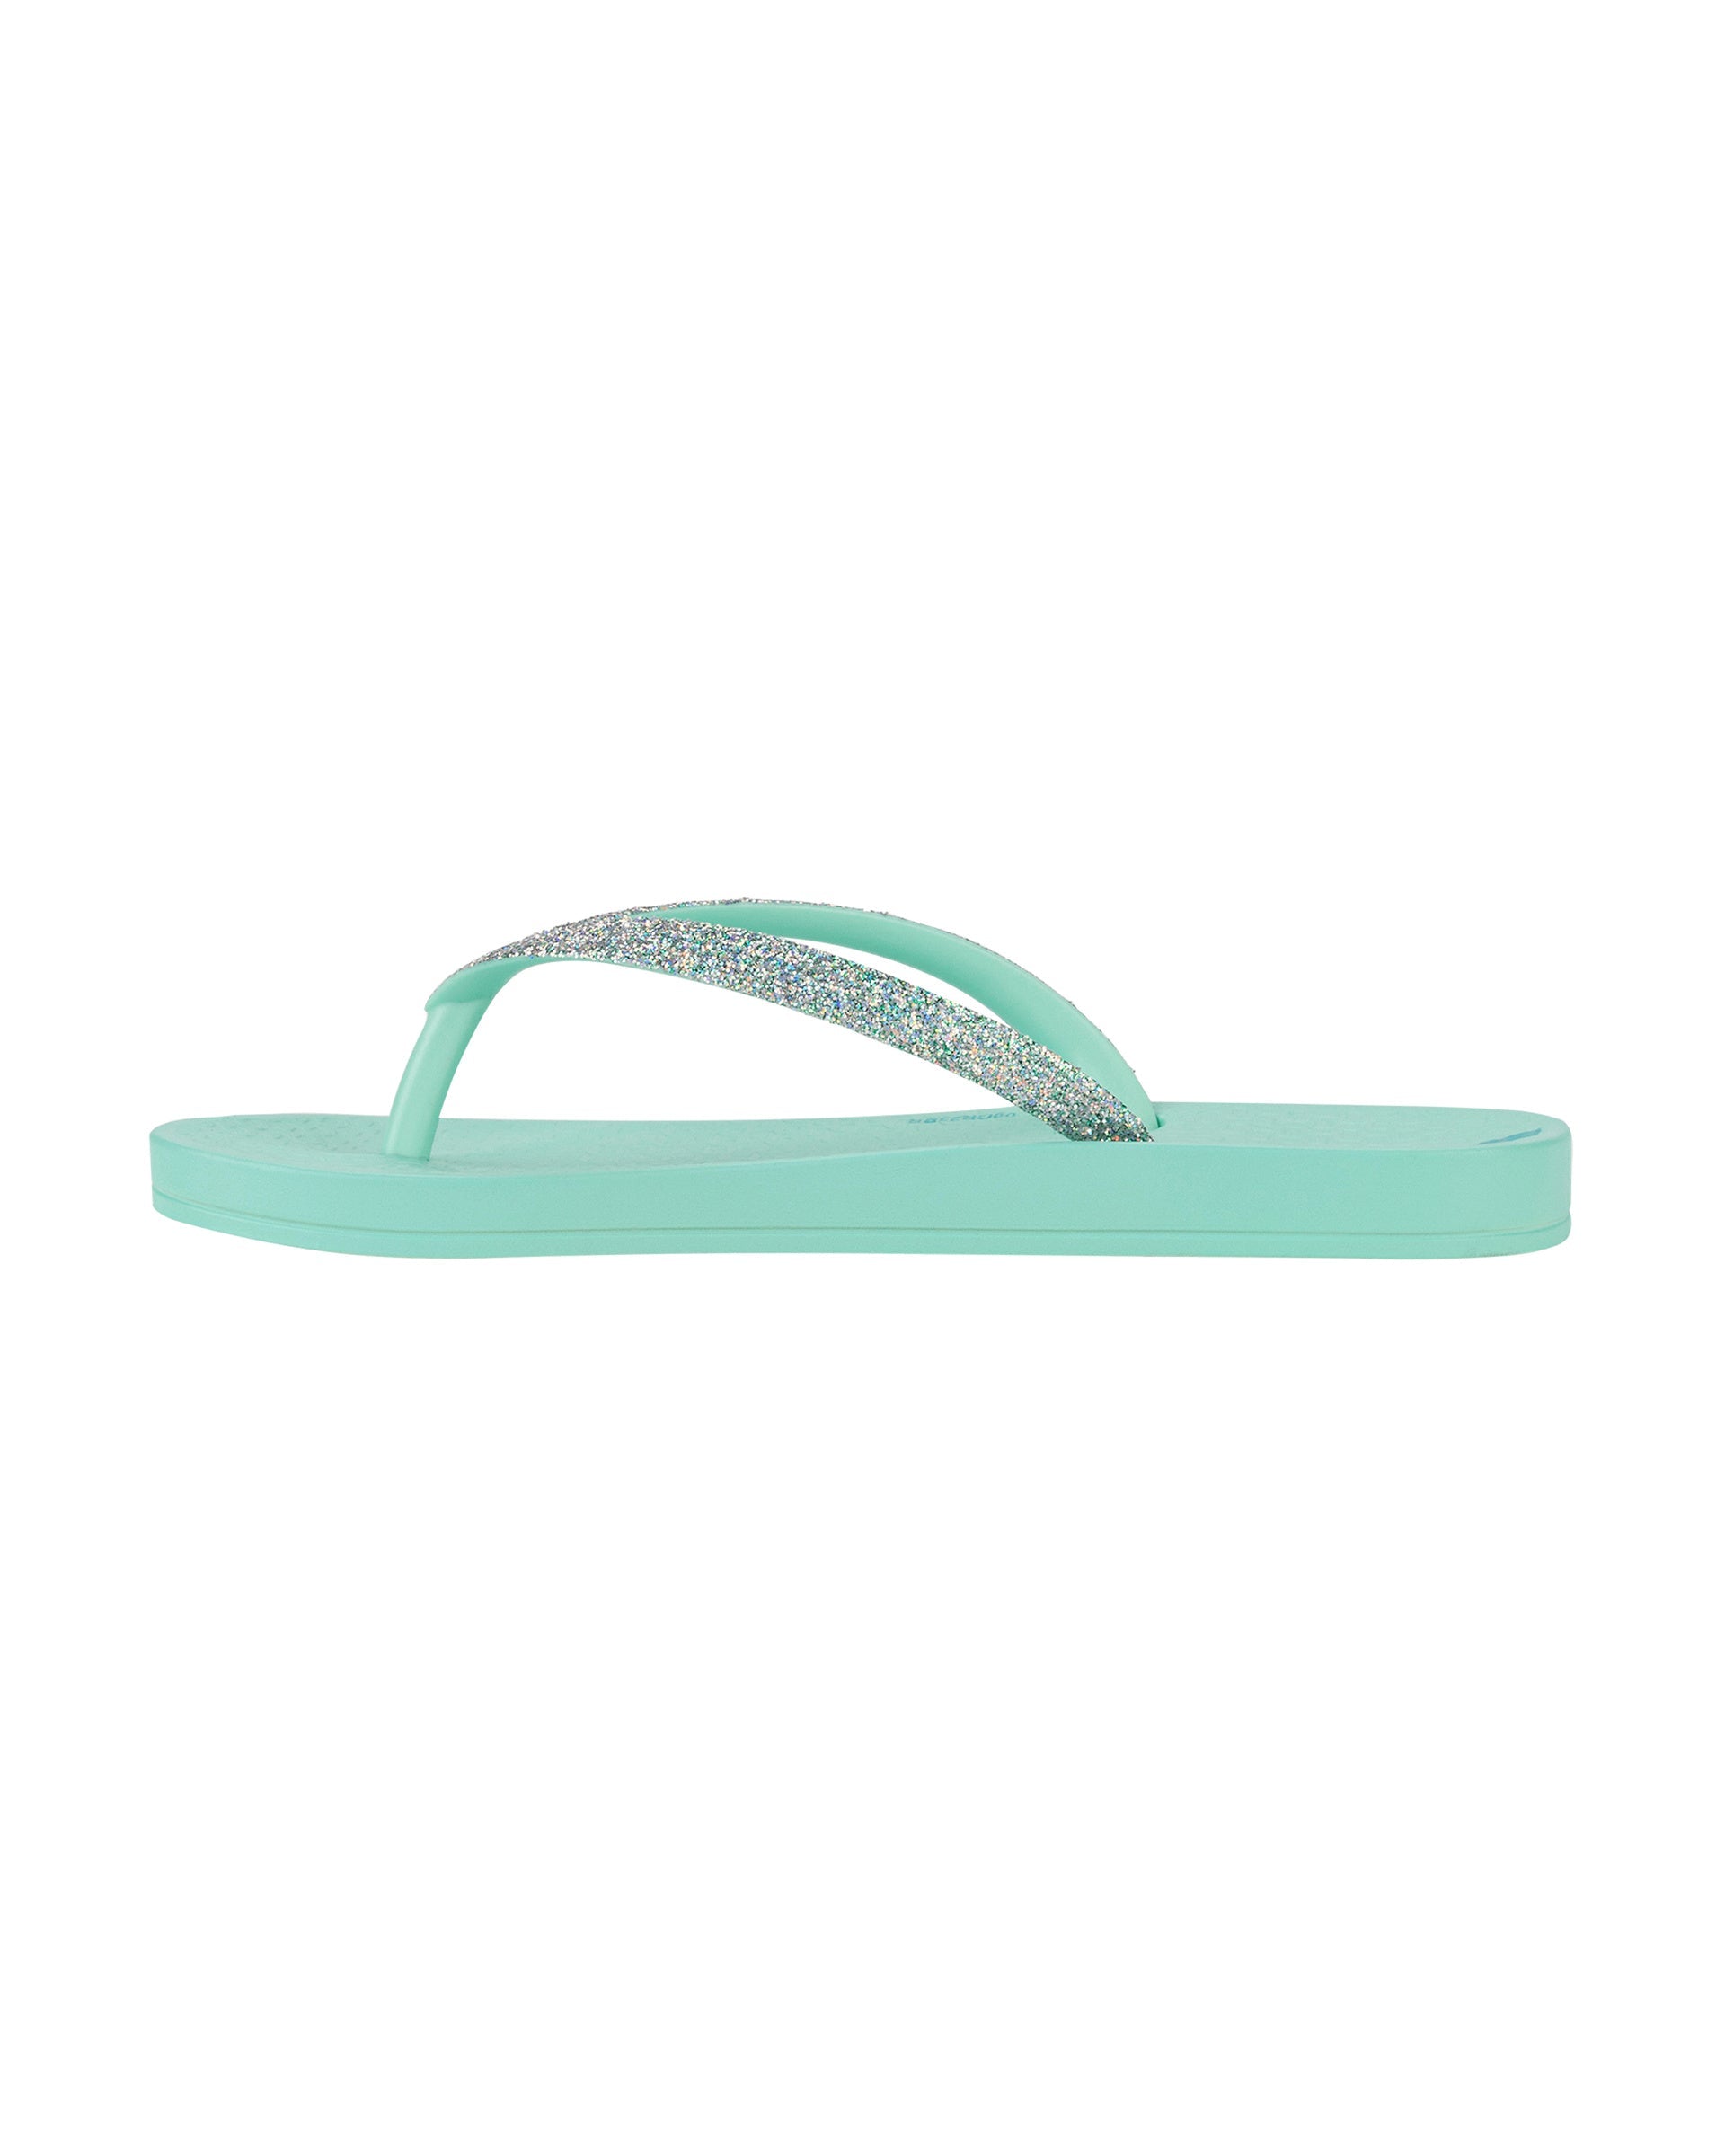 Inner side view of a green Ipanema Ana Sparkle kids flip flop with silver glitter strap.